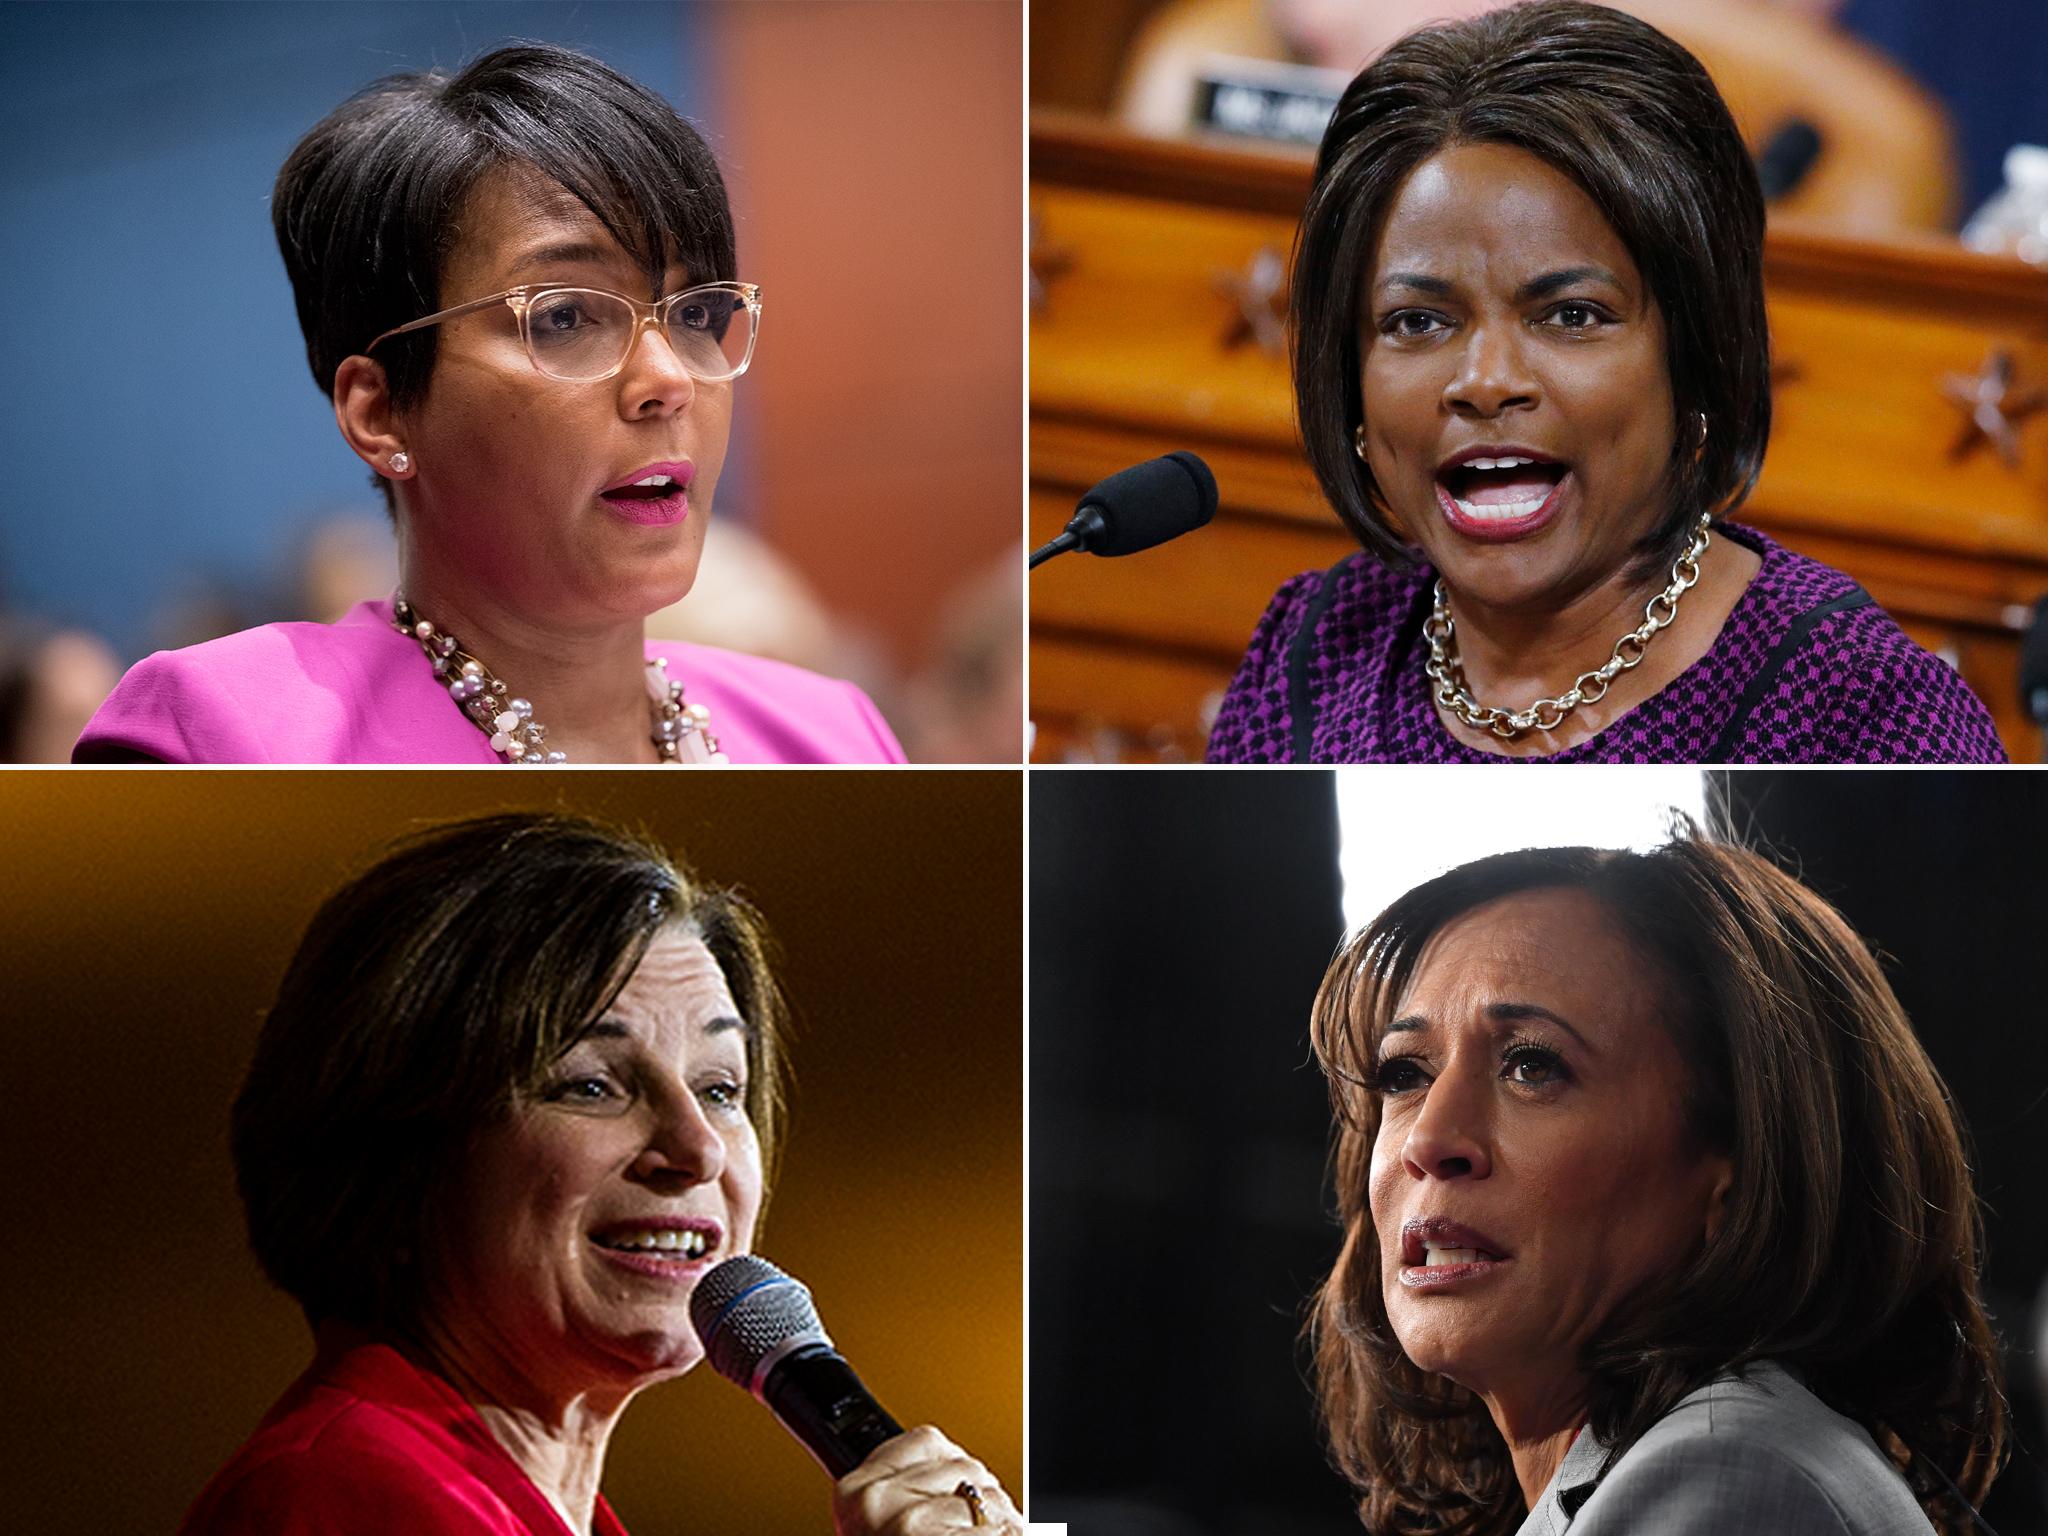 From top clockwise: Keisha Lance Bottoms, Val Demings, Kamala Harris and Amy Klobuchar, all of whom have been touted as picks